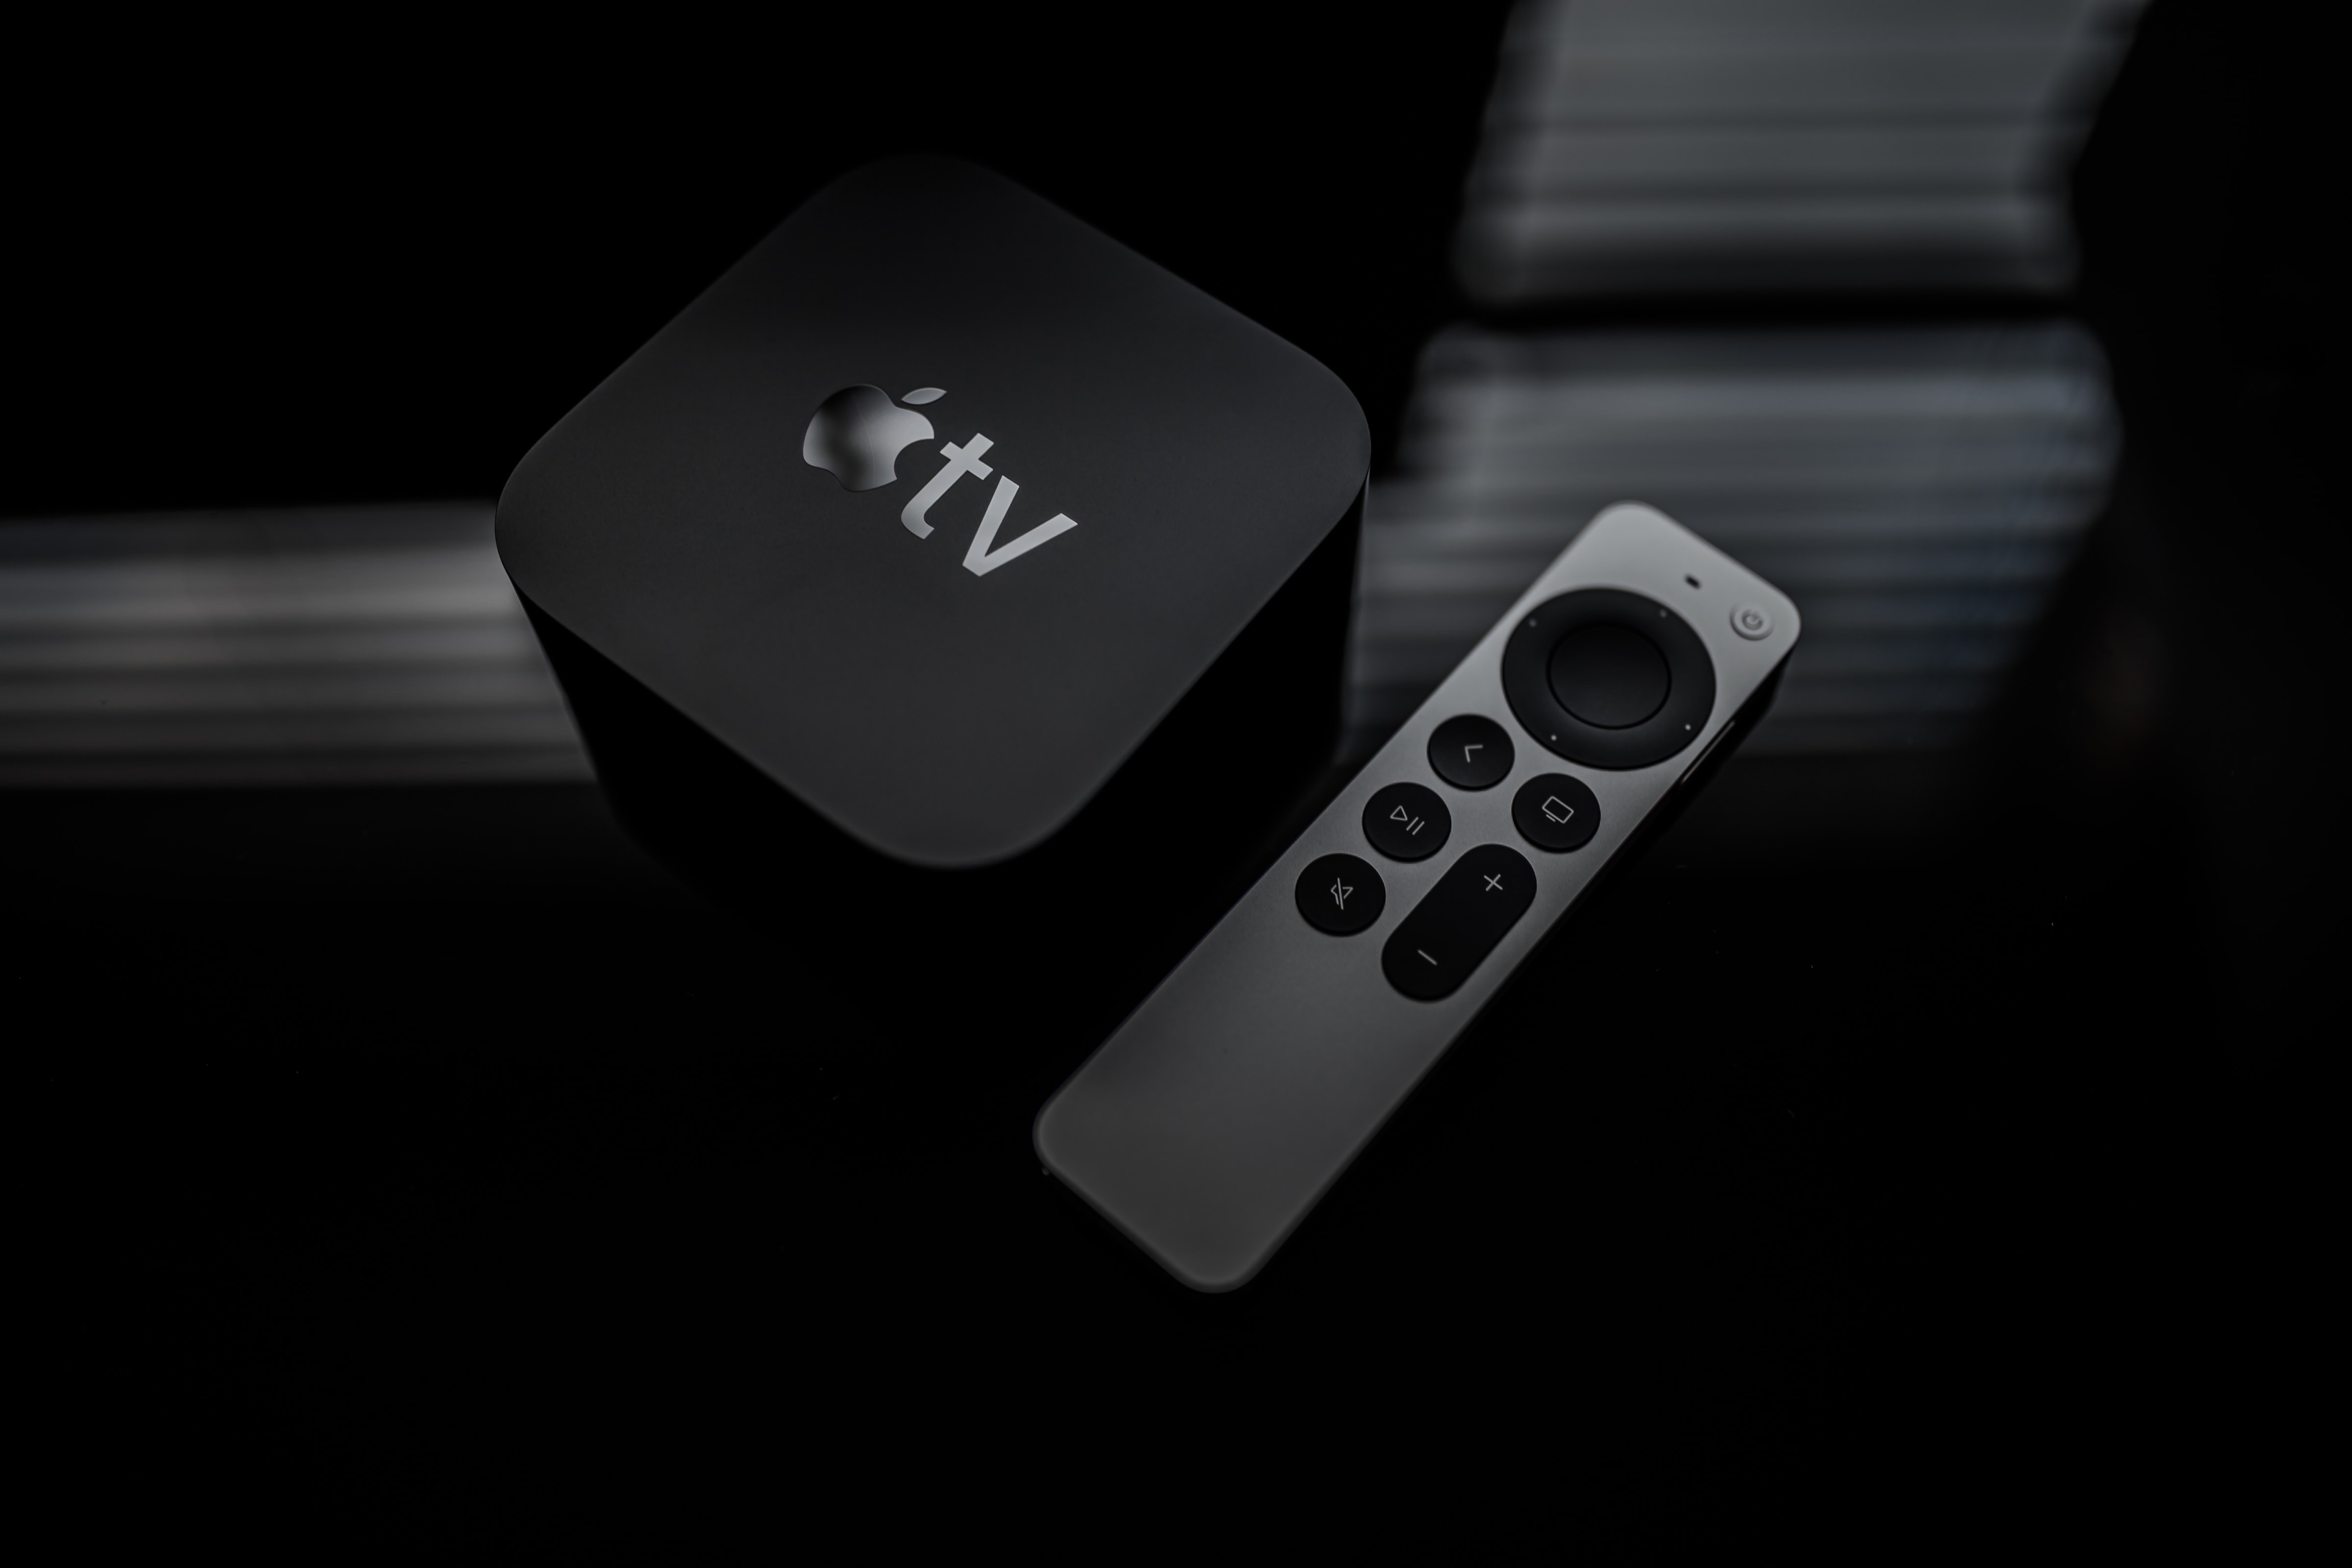 Wonderinterest | Quality or quantity? Apple TV+ blows away the competitors